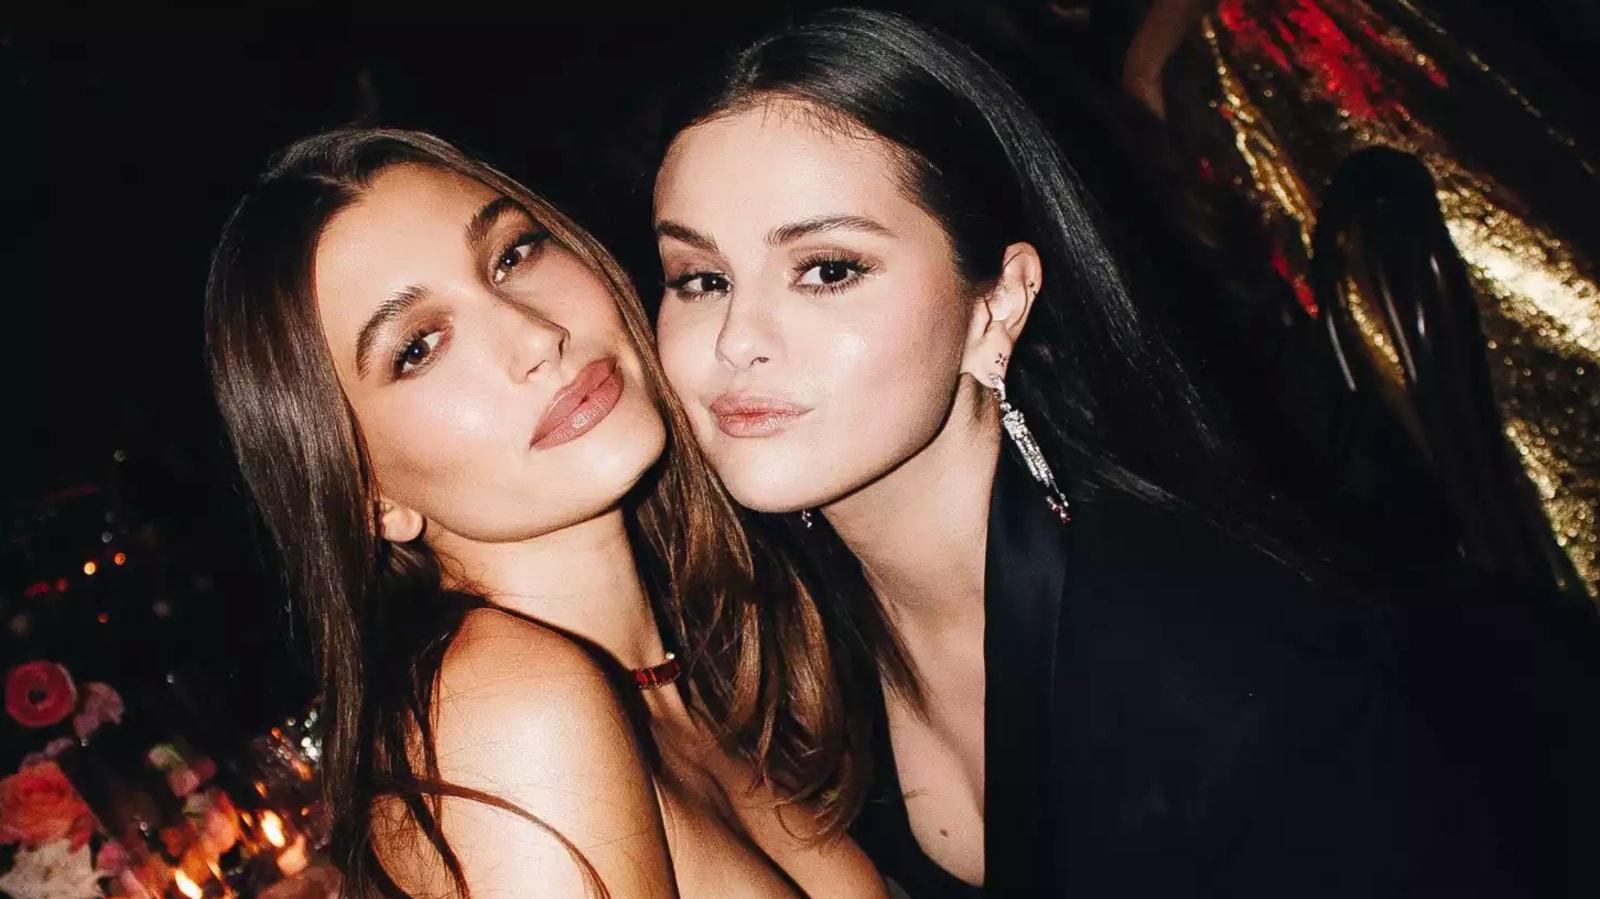 Selena Gomez Poses With Hailey Bieber For First Pic Together